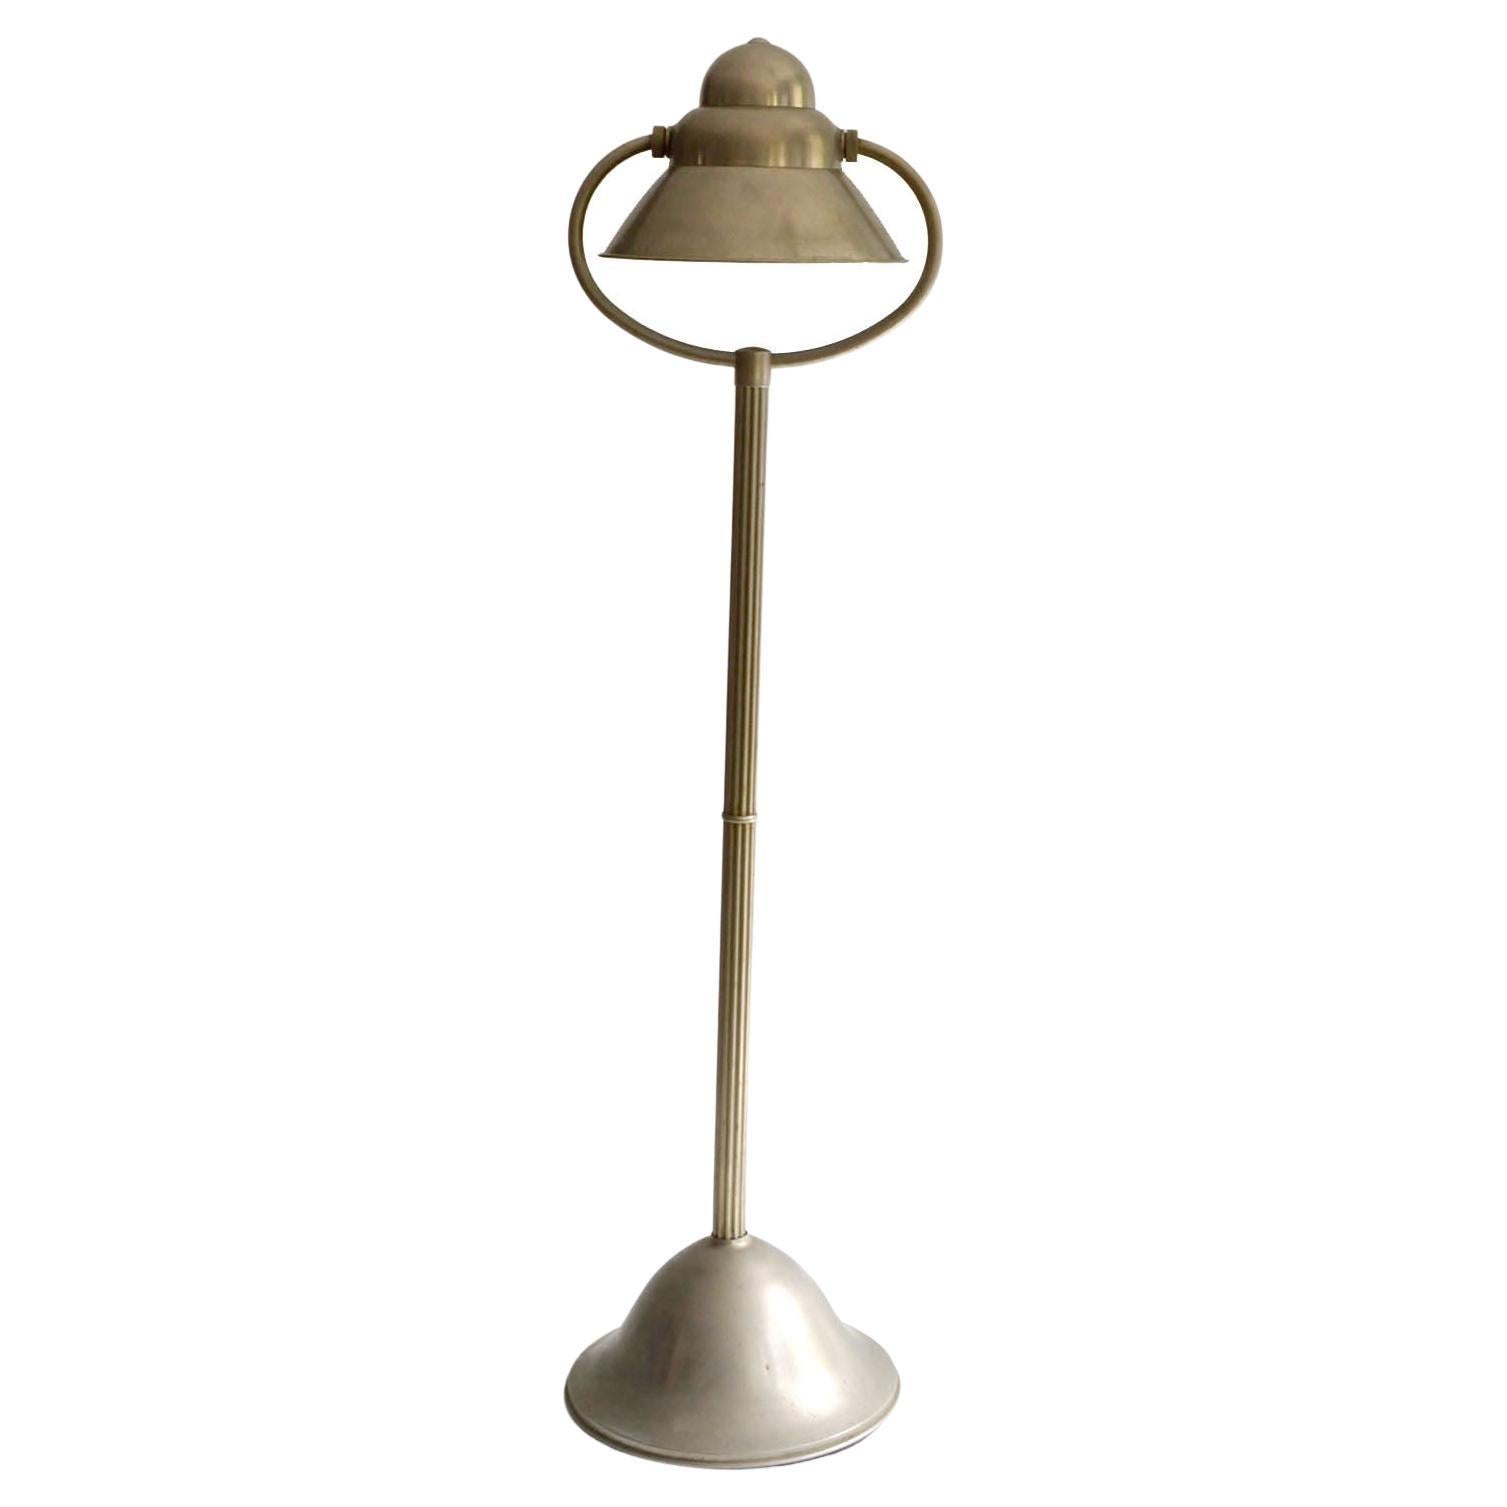 Dutch Art Deco Floor Lamp 1920's with Adjustable Shade in Nickel Attributed to Gispen  For Sale